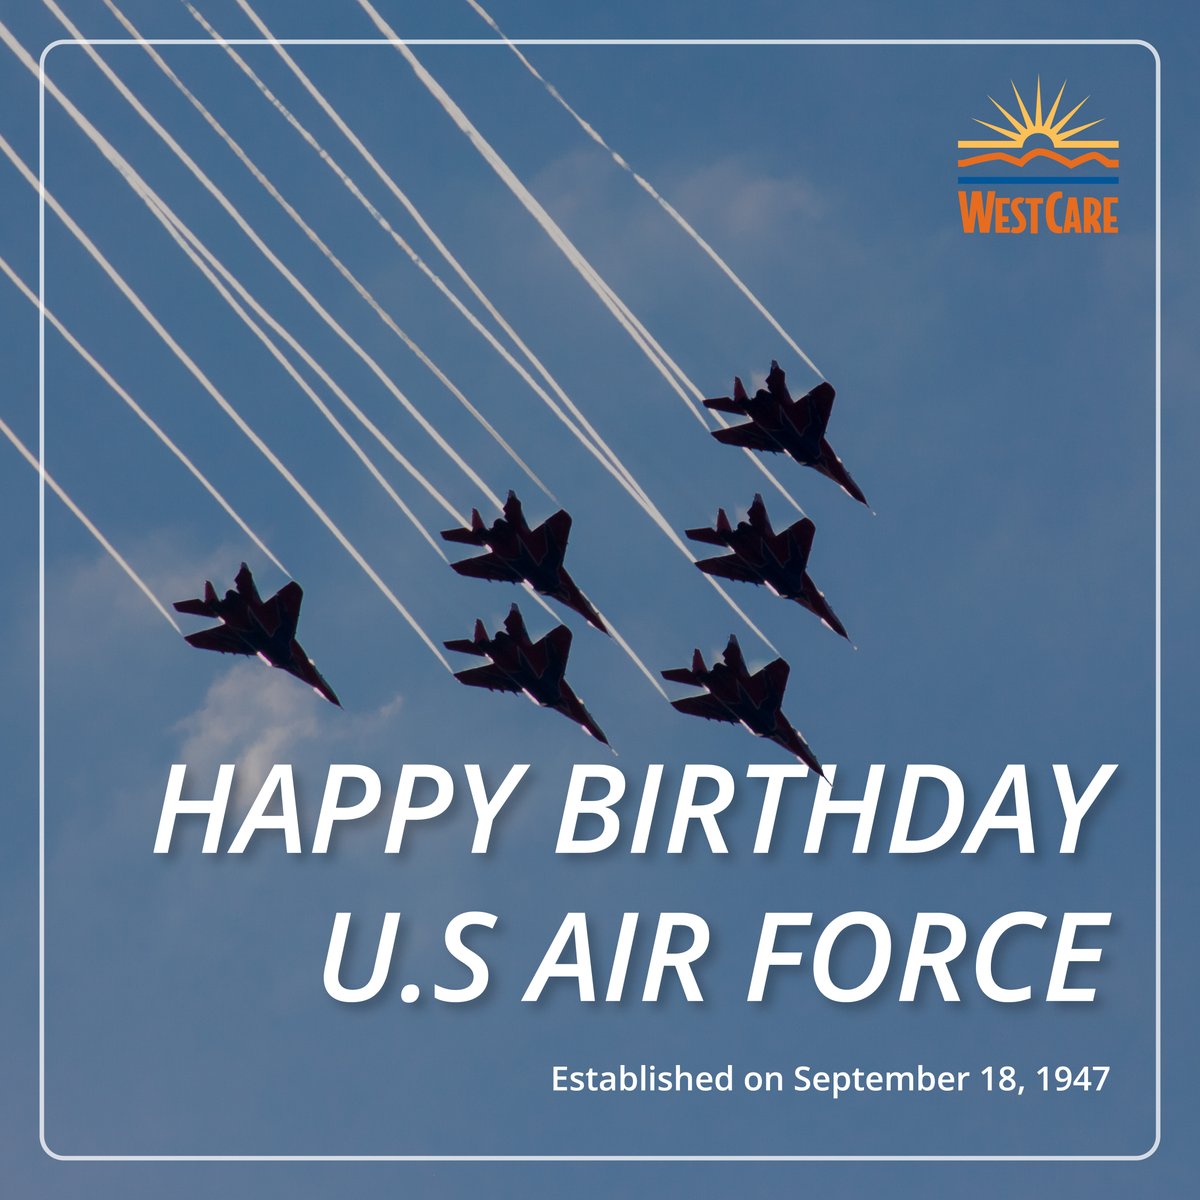 🇺🇸 Happy 76th Birthday to the United States Air Force 🇺🇸 
In honor of this day, we thank all our service members who are currently serving and have served in the Air Force. #thankyouforyourservice #hbd #militarybirthday